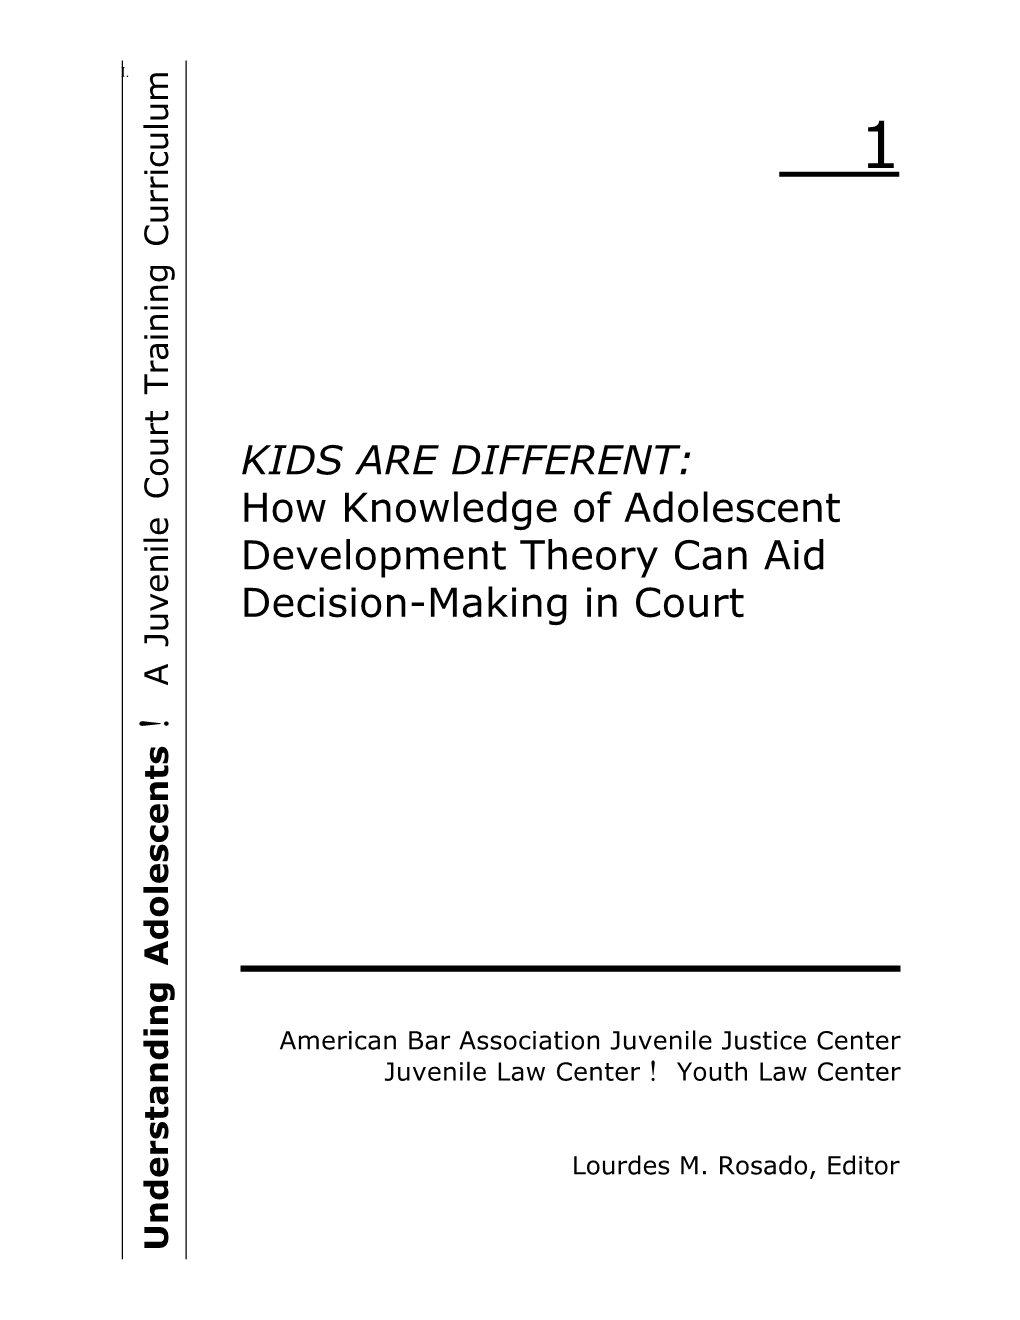 How Knowledge of Adolescent Development Theory Can Aid Decision-Making in Court